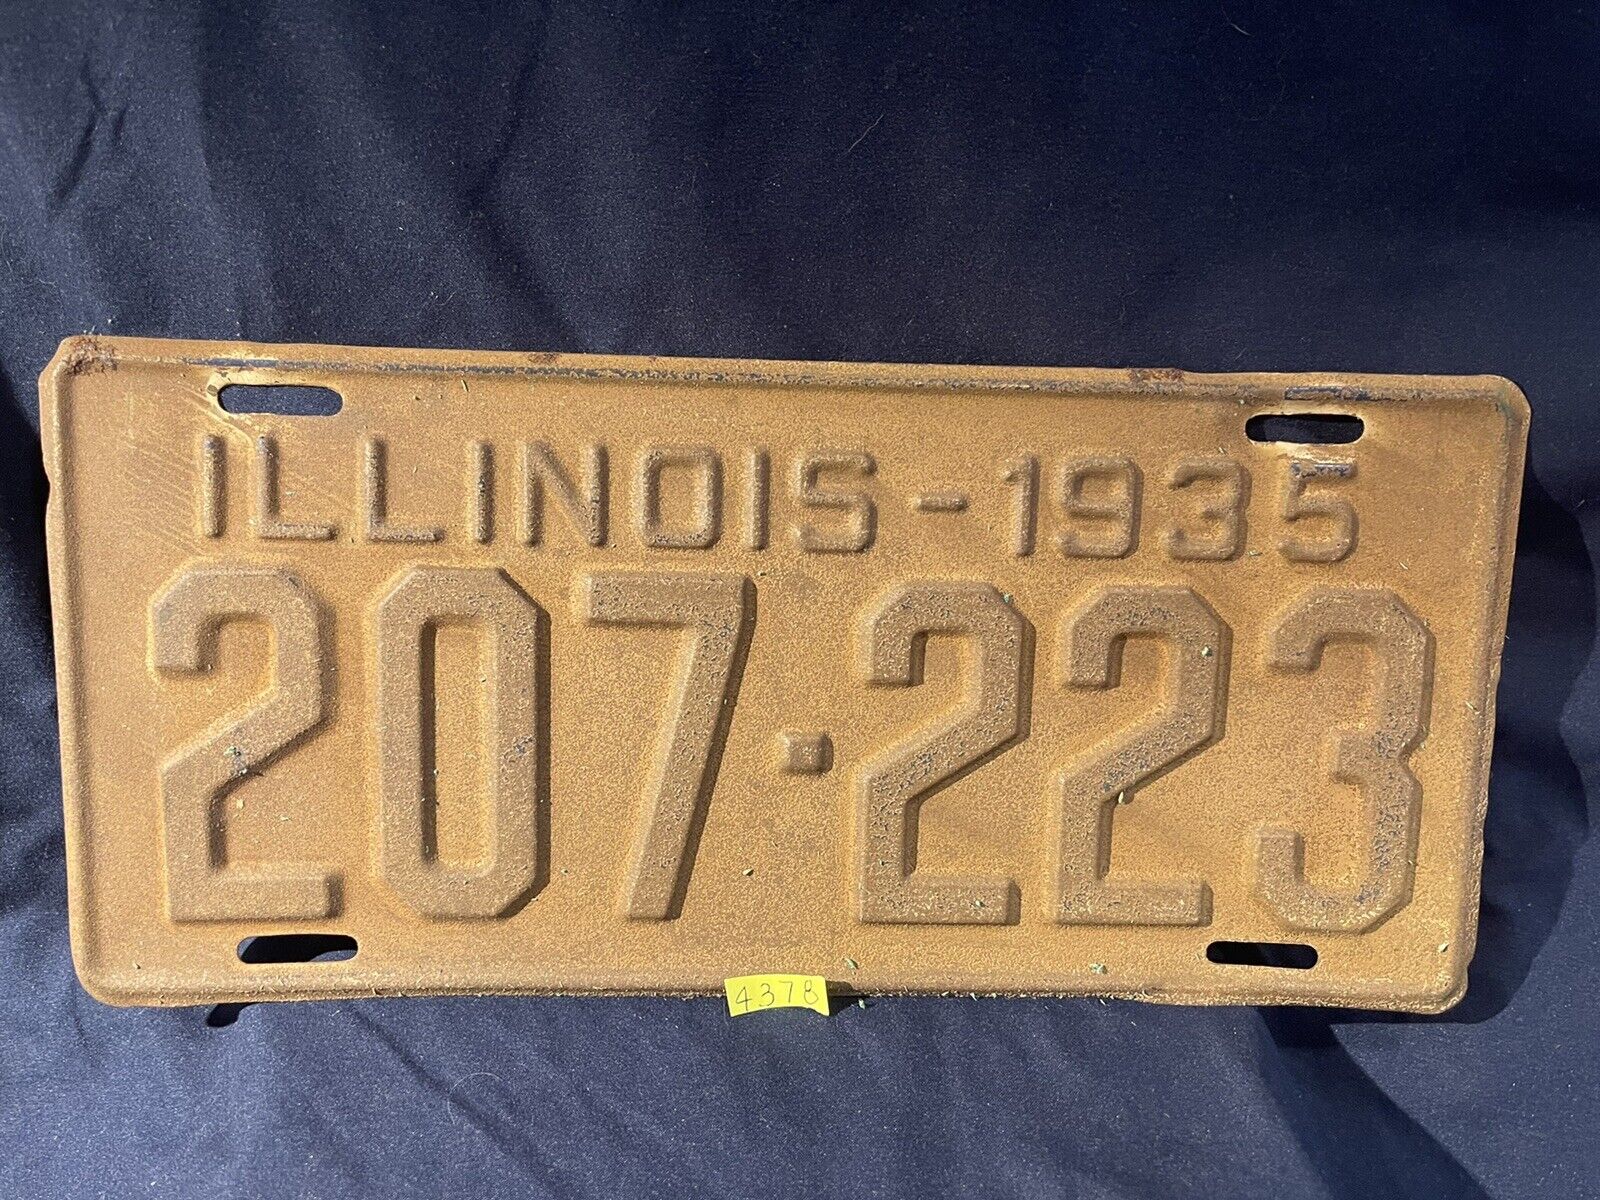 1935 State of Illinois License Plate- Great Condition 88yrs old -Ships Free2US